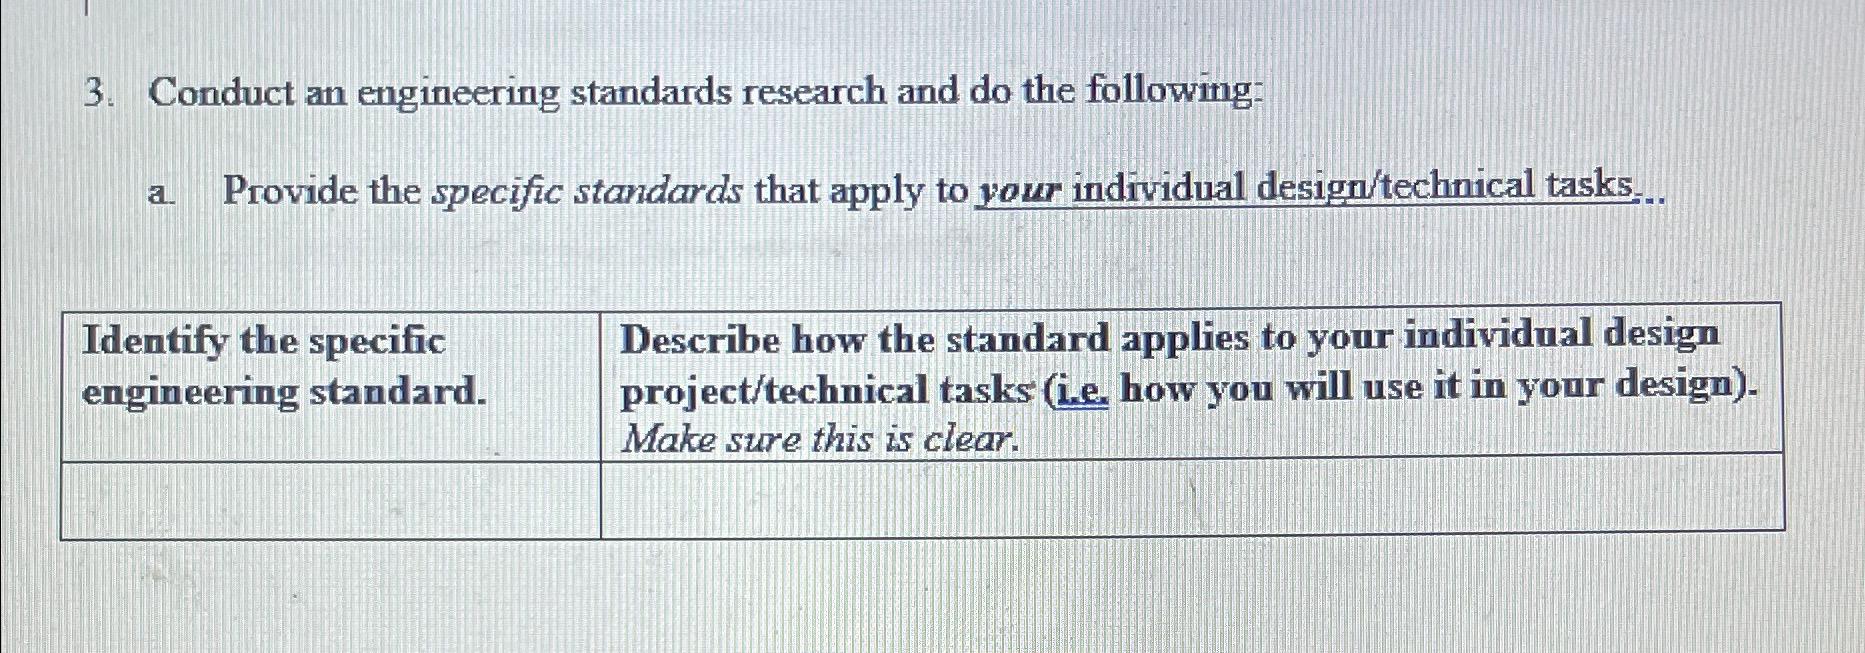 3. Conduct an engineering standards research and do the following: a Provide the specific standards that